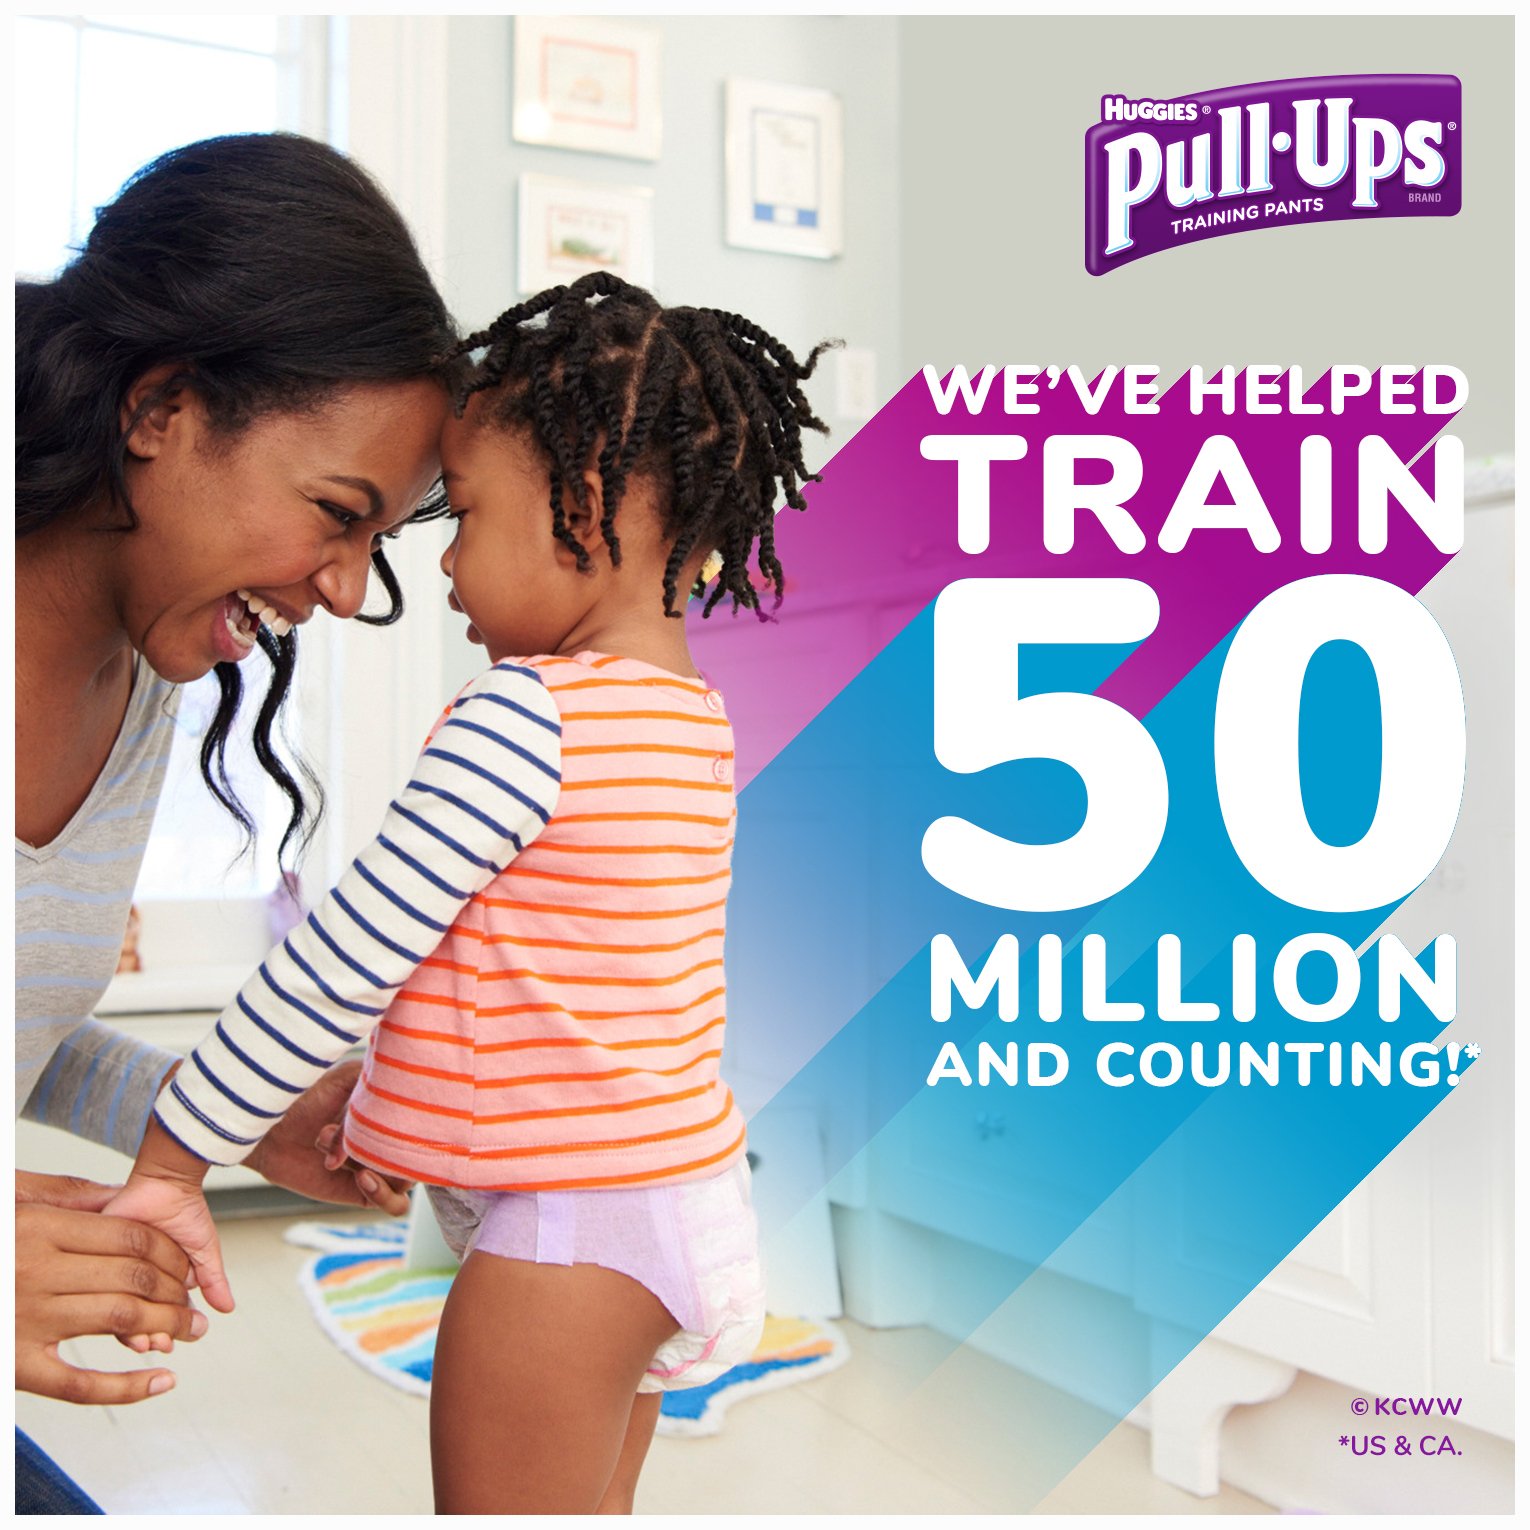 Pull-Ups Night-Time Potty Training Pants for Girls, 2T-3T (18-34 lb.), 23 Ct. (Packaging May Vary) - image 7 of 7